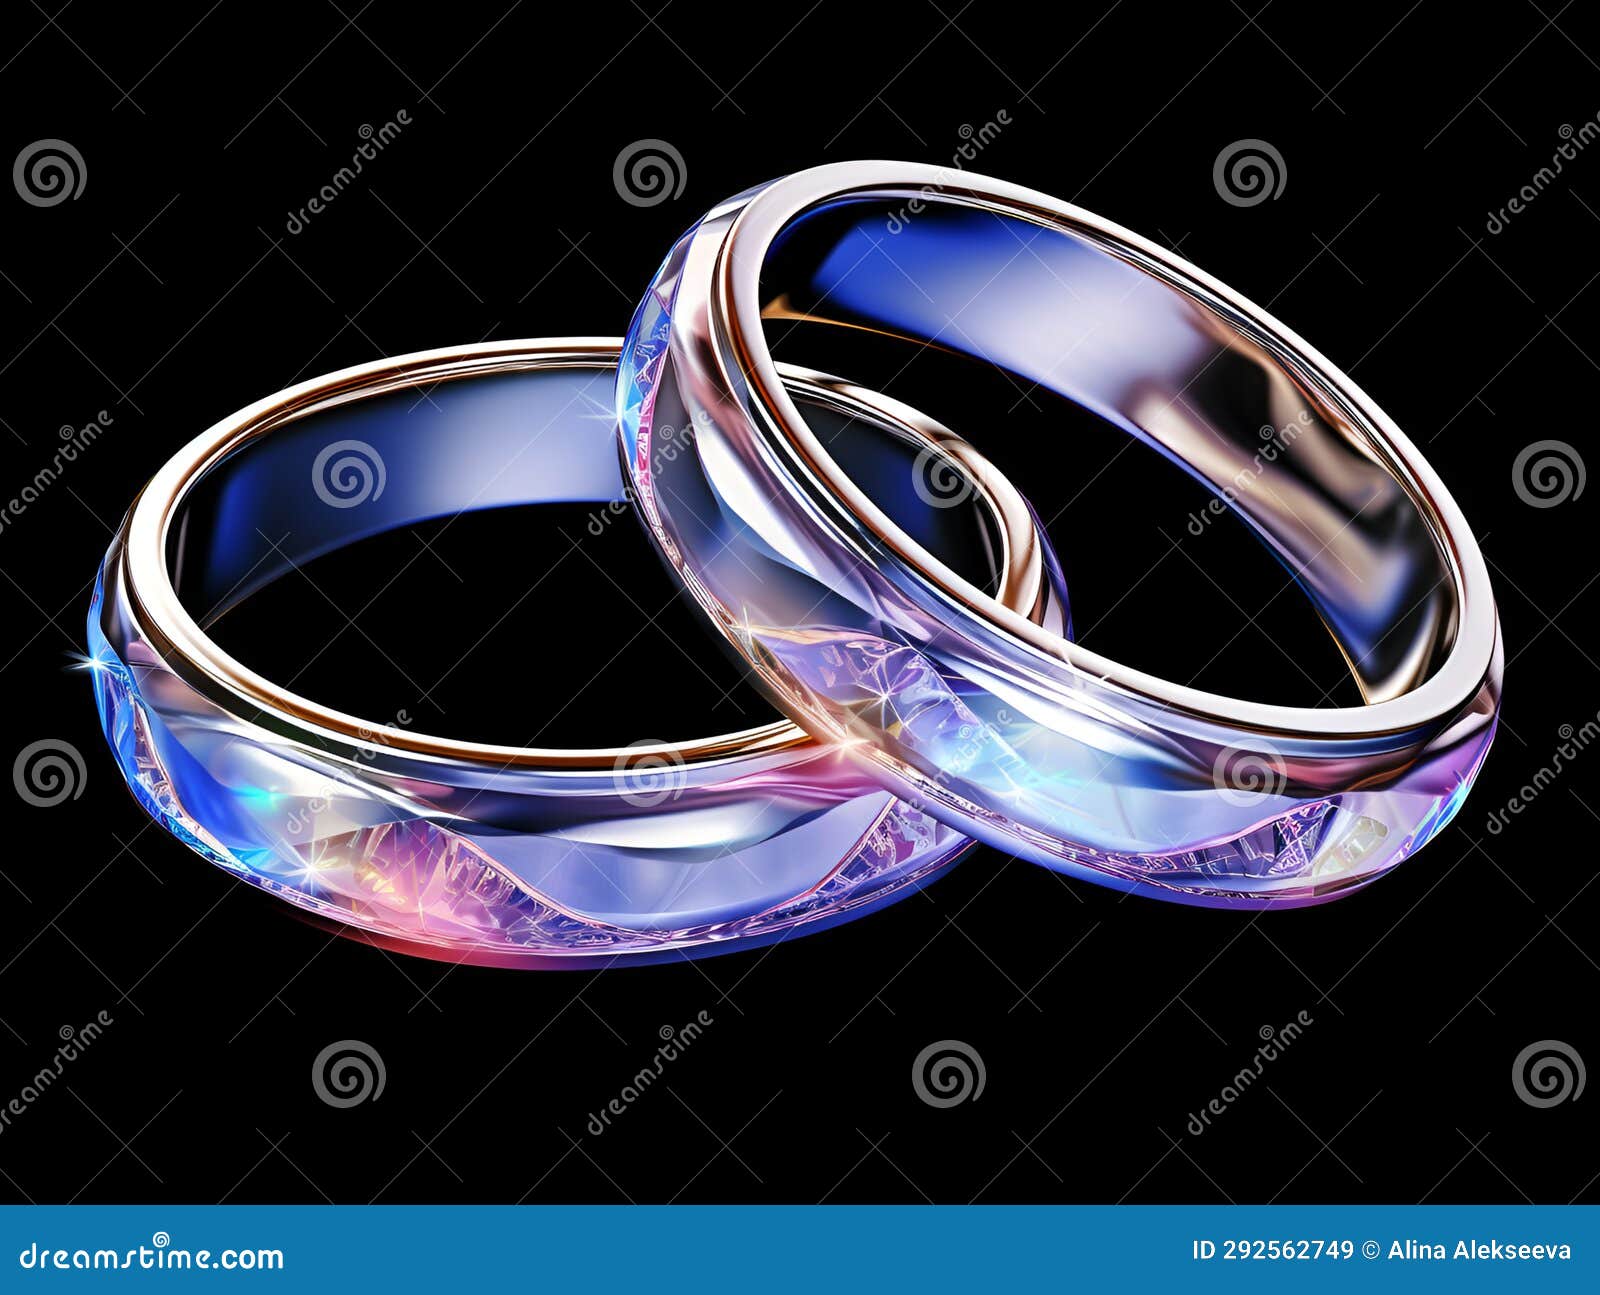 His and Hers wedding ring set. Galaxy fire opal ring. Tungsten glow ri –  Orth Custom Rings